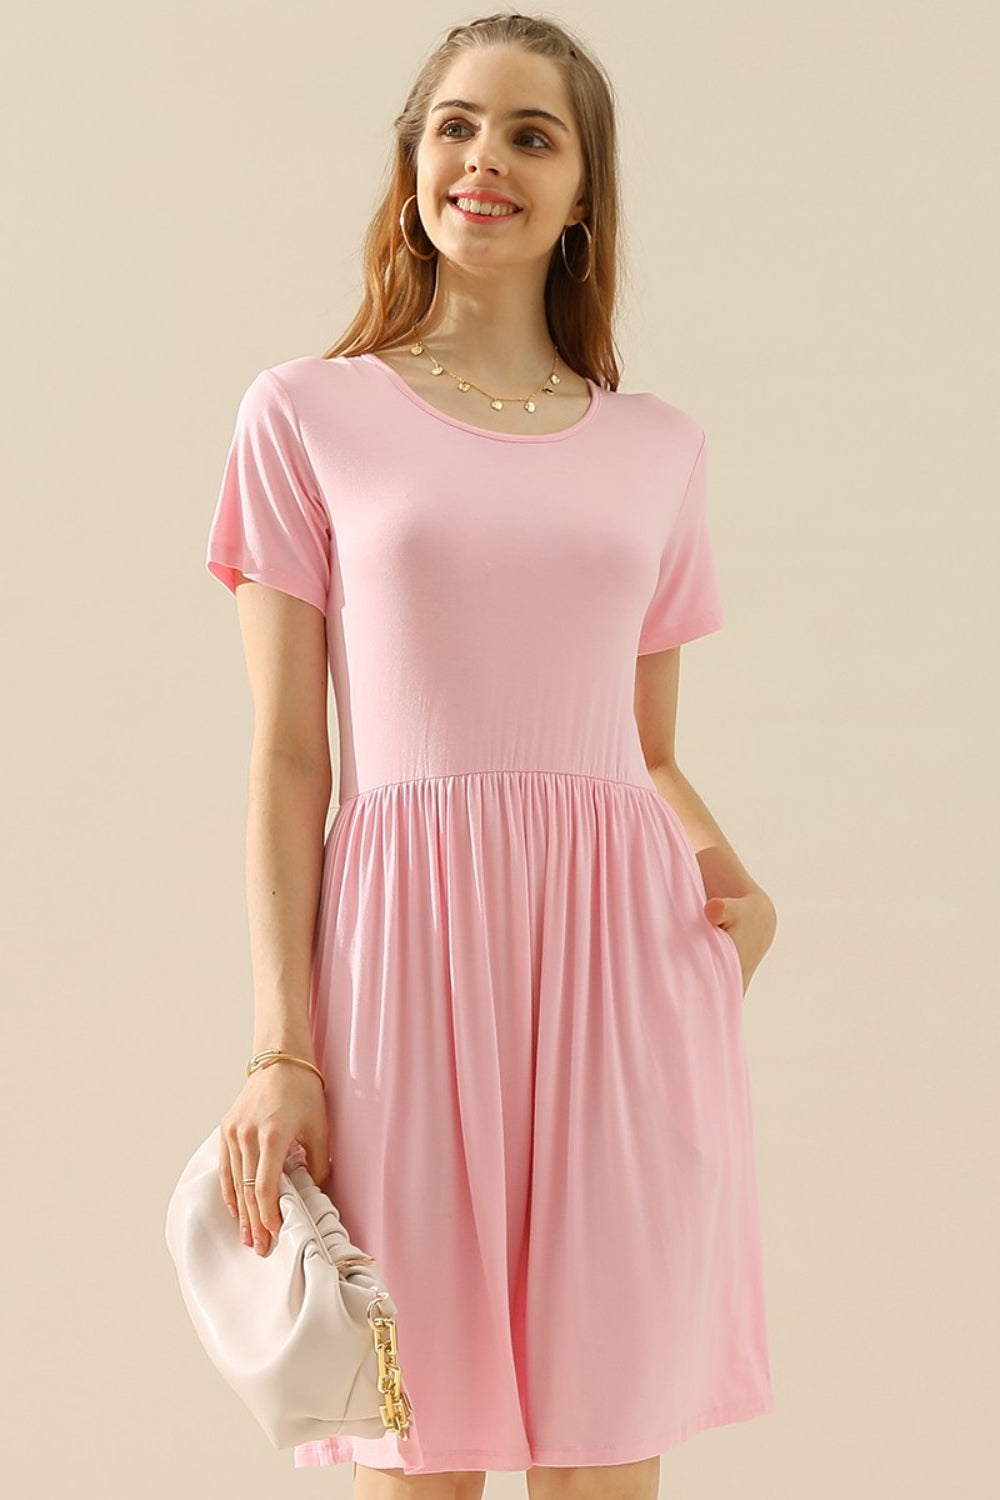 Ninexis Full Size Round Neck Ruched Dress with Pockets - LT PINK / S - DRESSES - Mixed